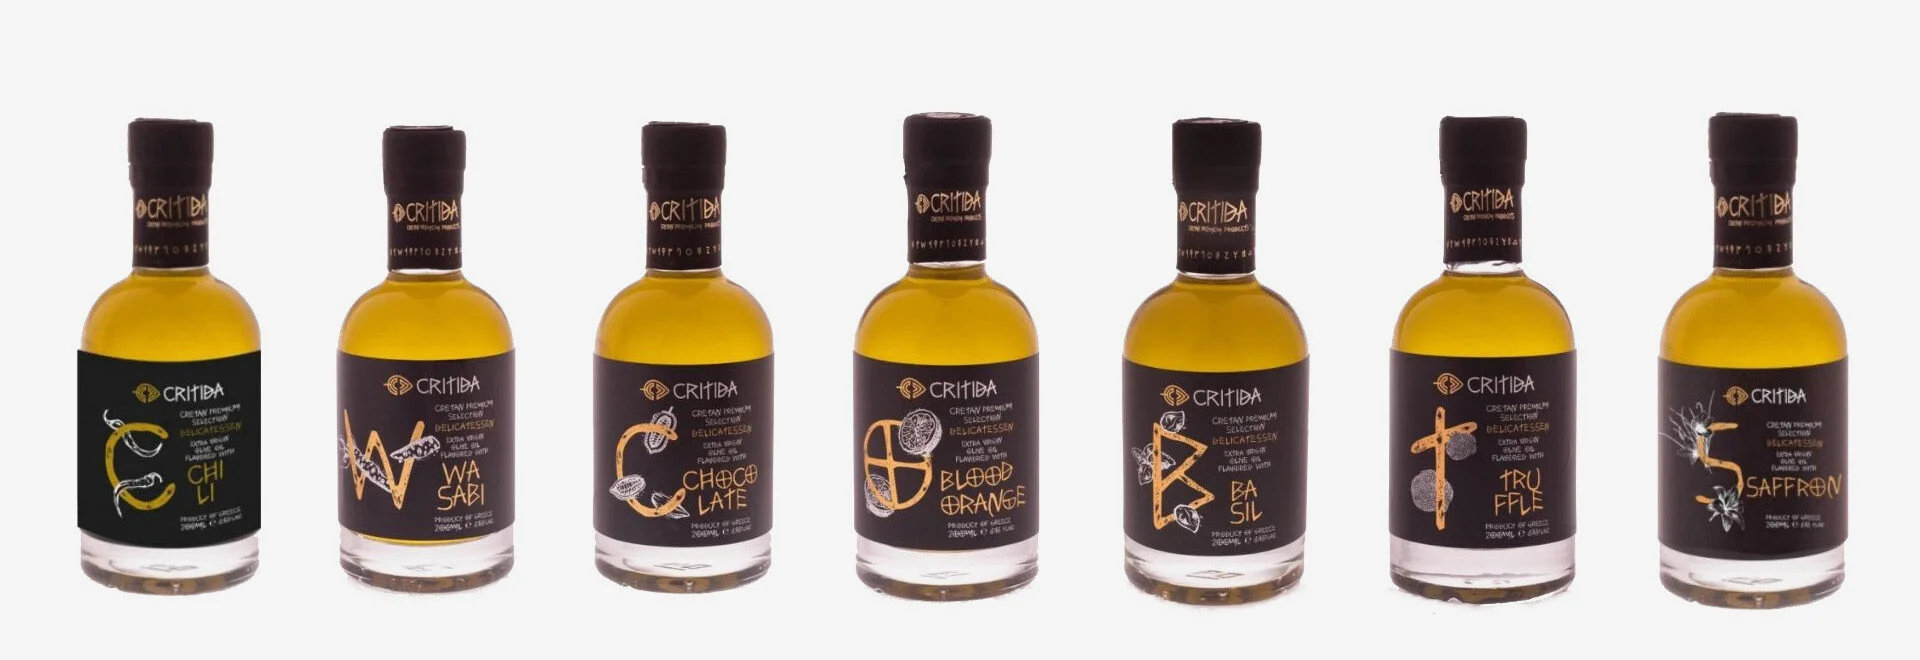 Our flavored Extra Virgin Olive Oil (EVOO) premium products from the island of Crete Greece